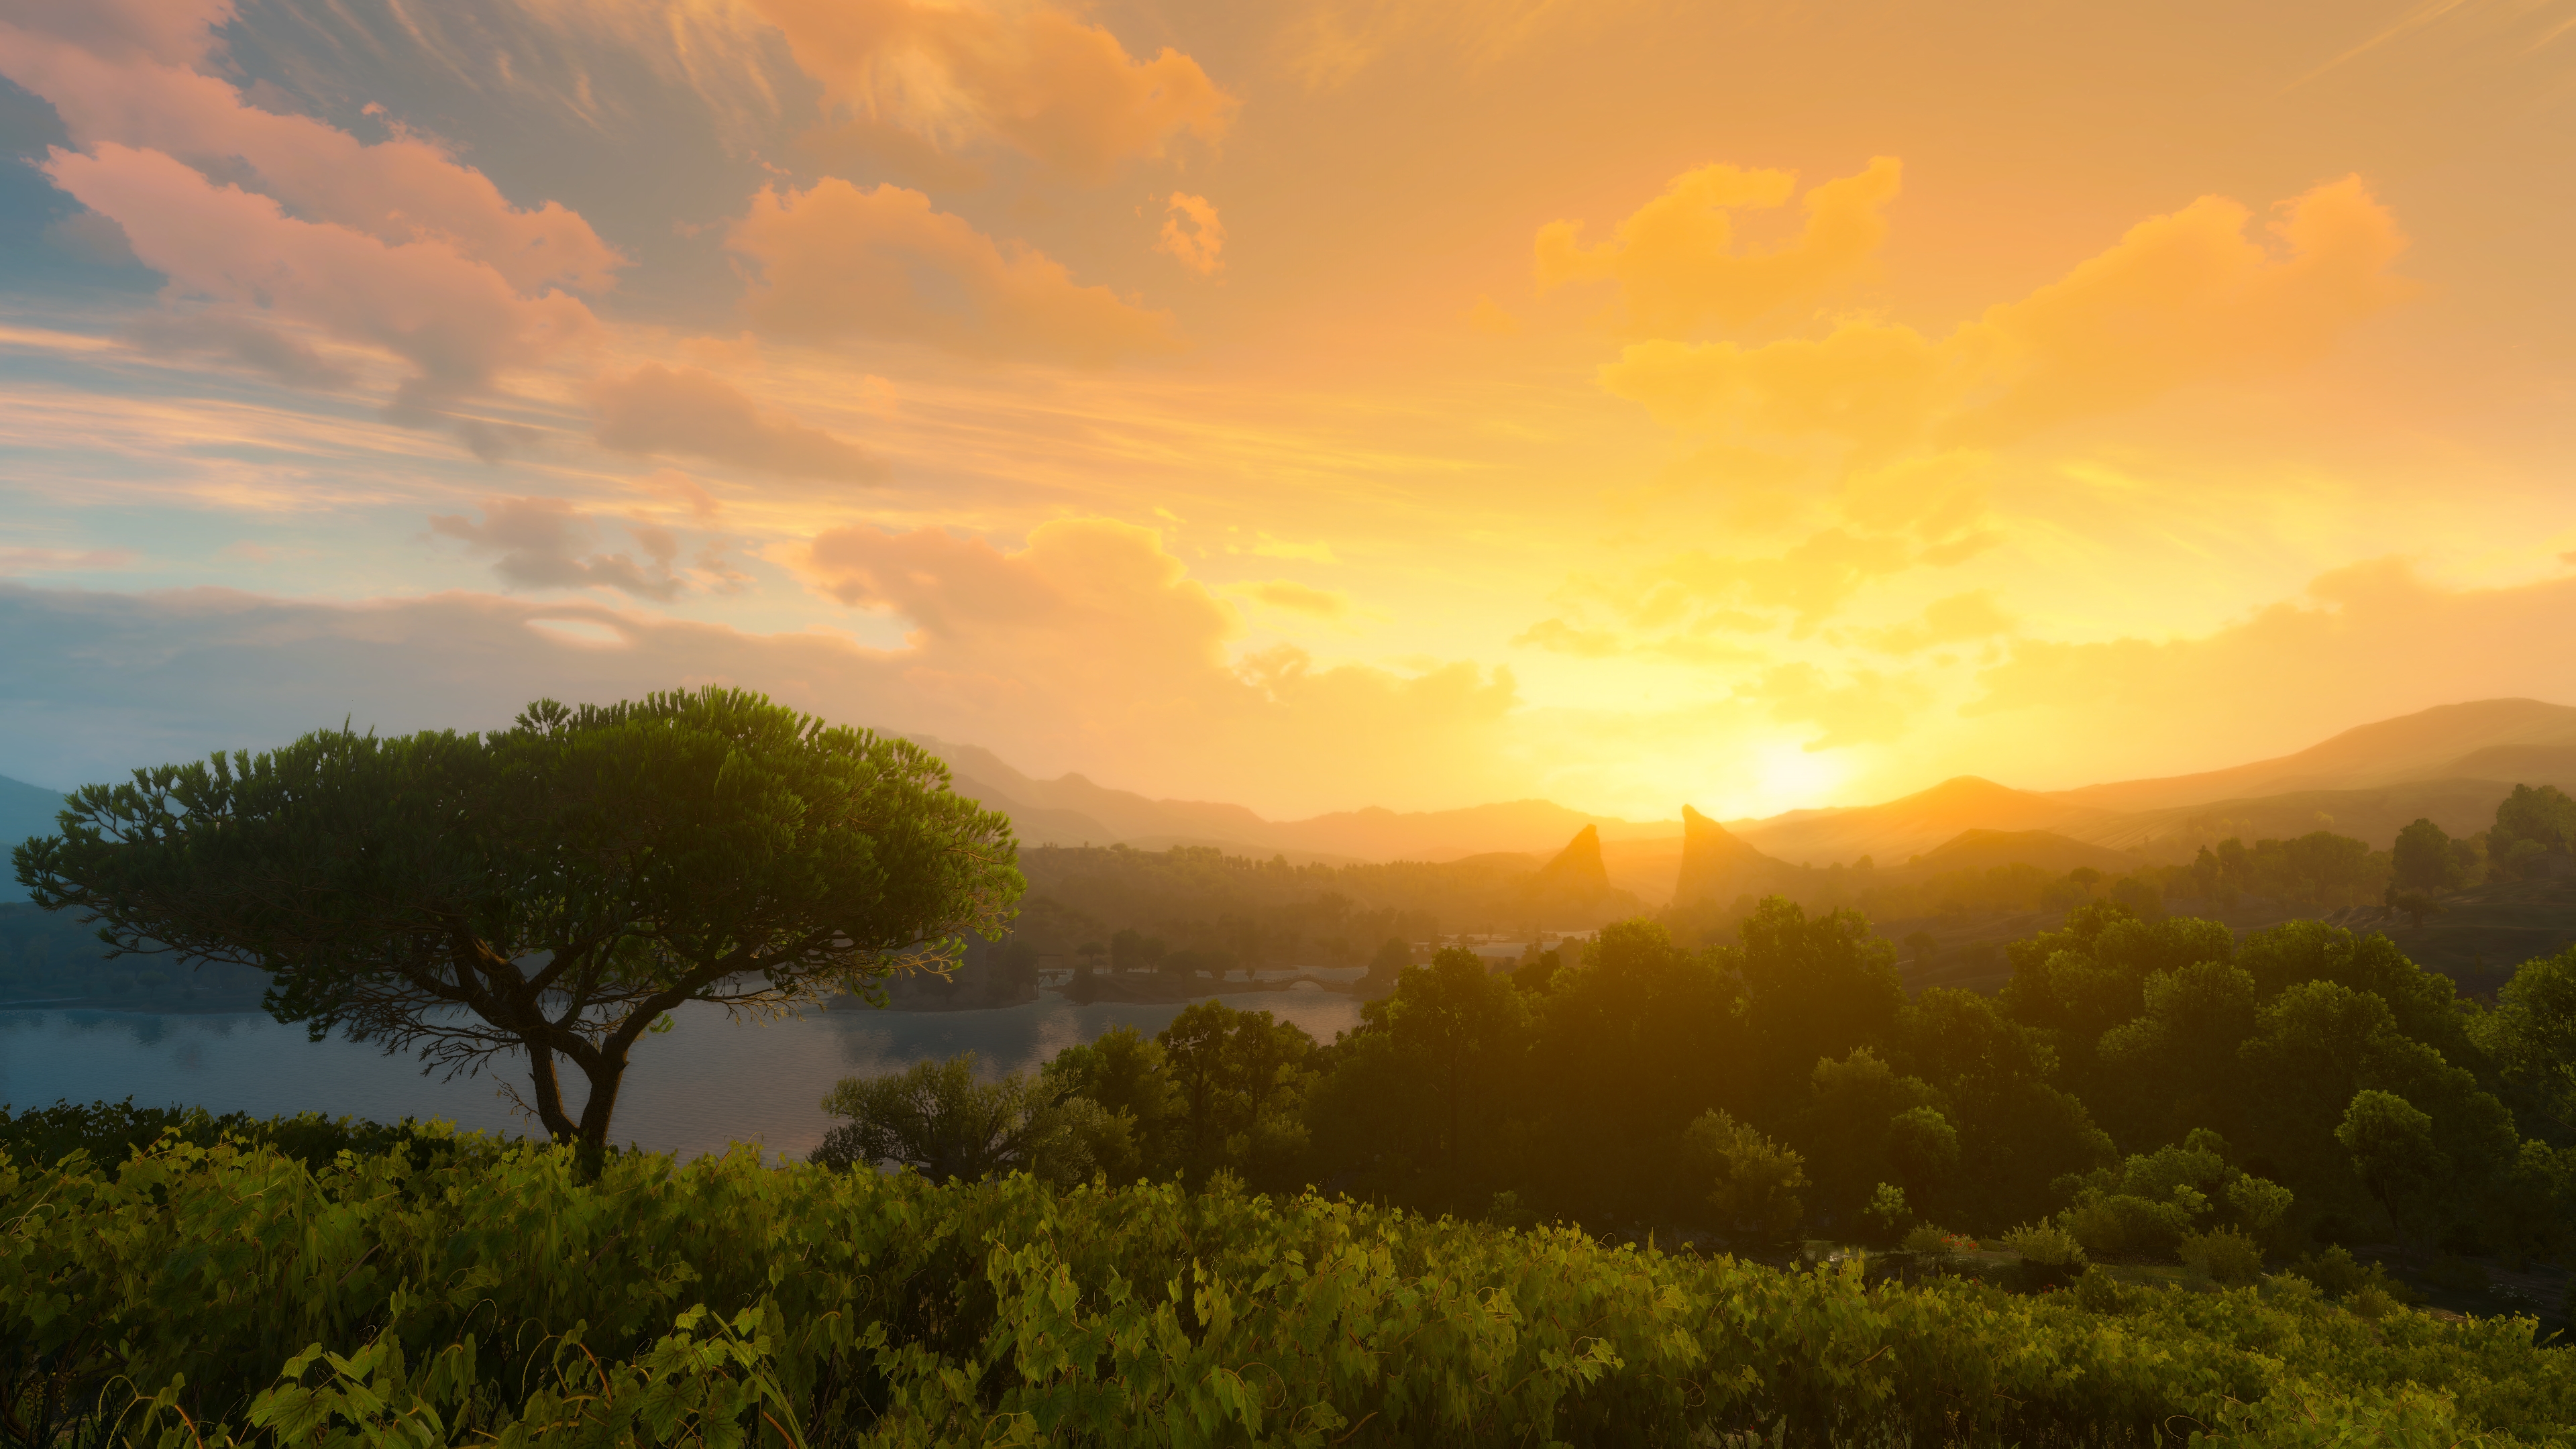 General 3840x2160 The Witcher 3: Wild Hunt PC gaming video games The Witcher 3: Wild Hunt - Blood and Wine landscape dawn trees tussent clouds video game art screen shot water sky reflection sunset sunset glow sunlight